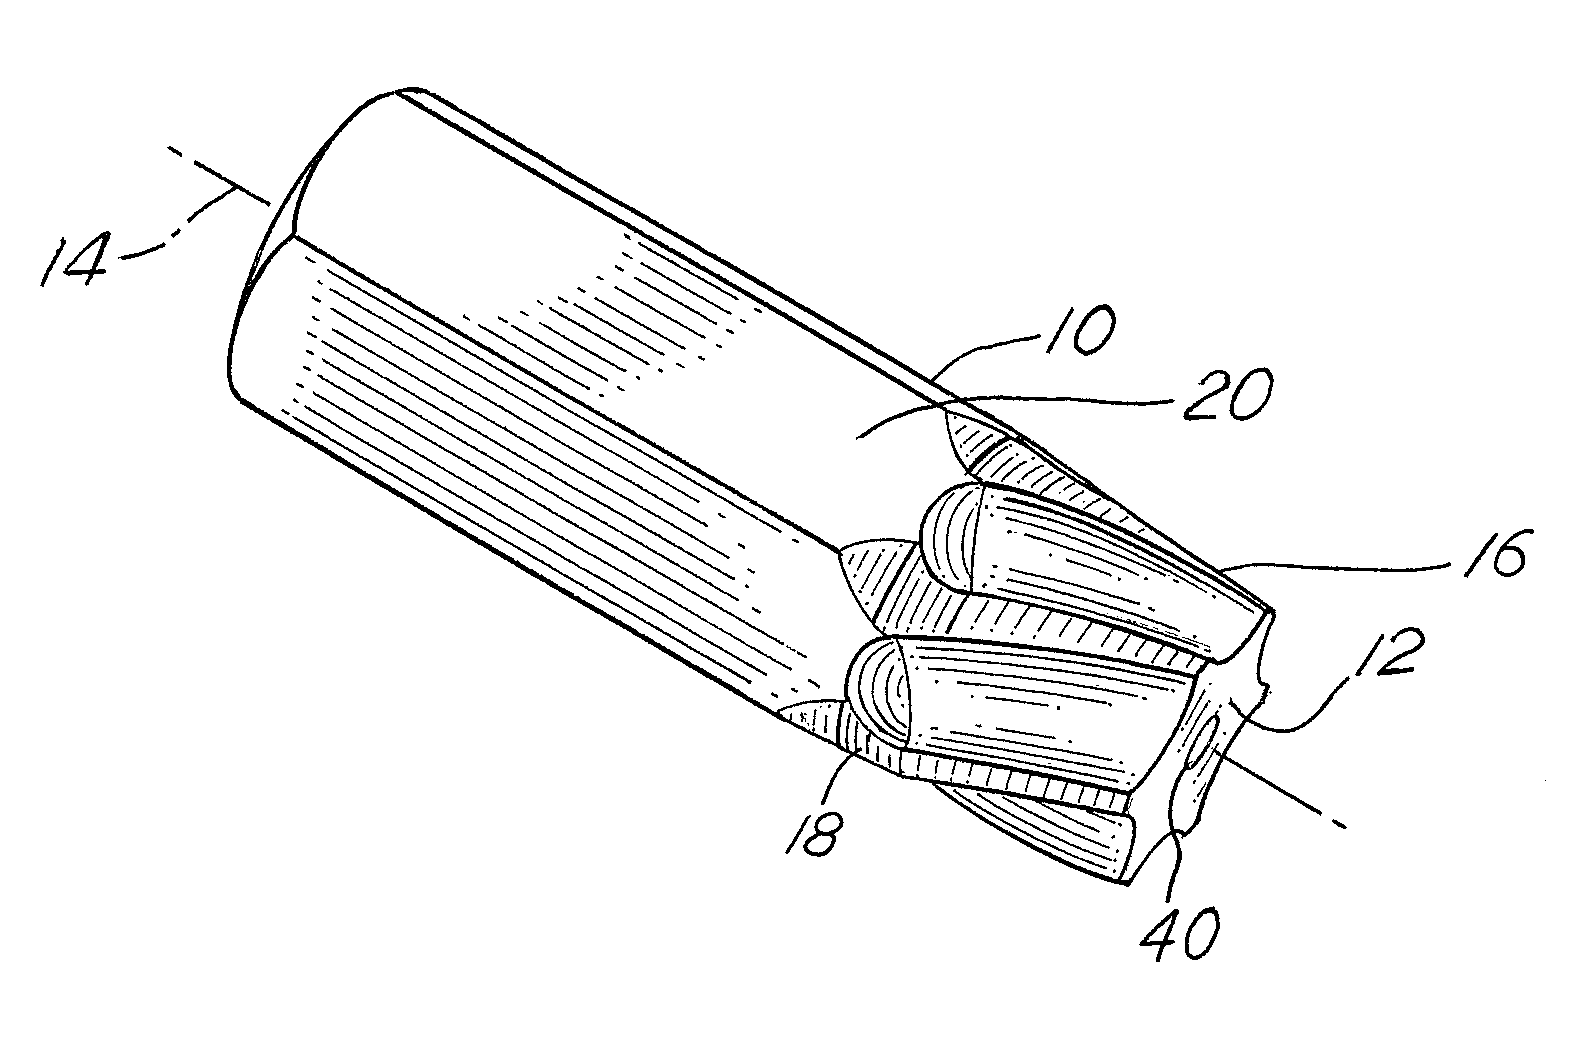 Extractor tool and extractor tool kit